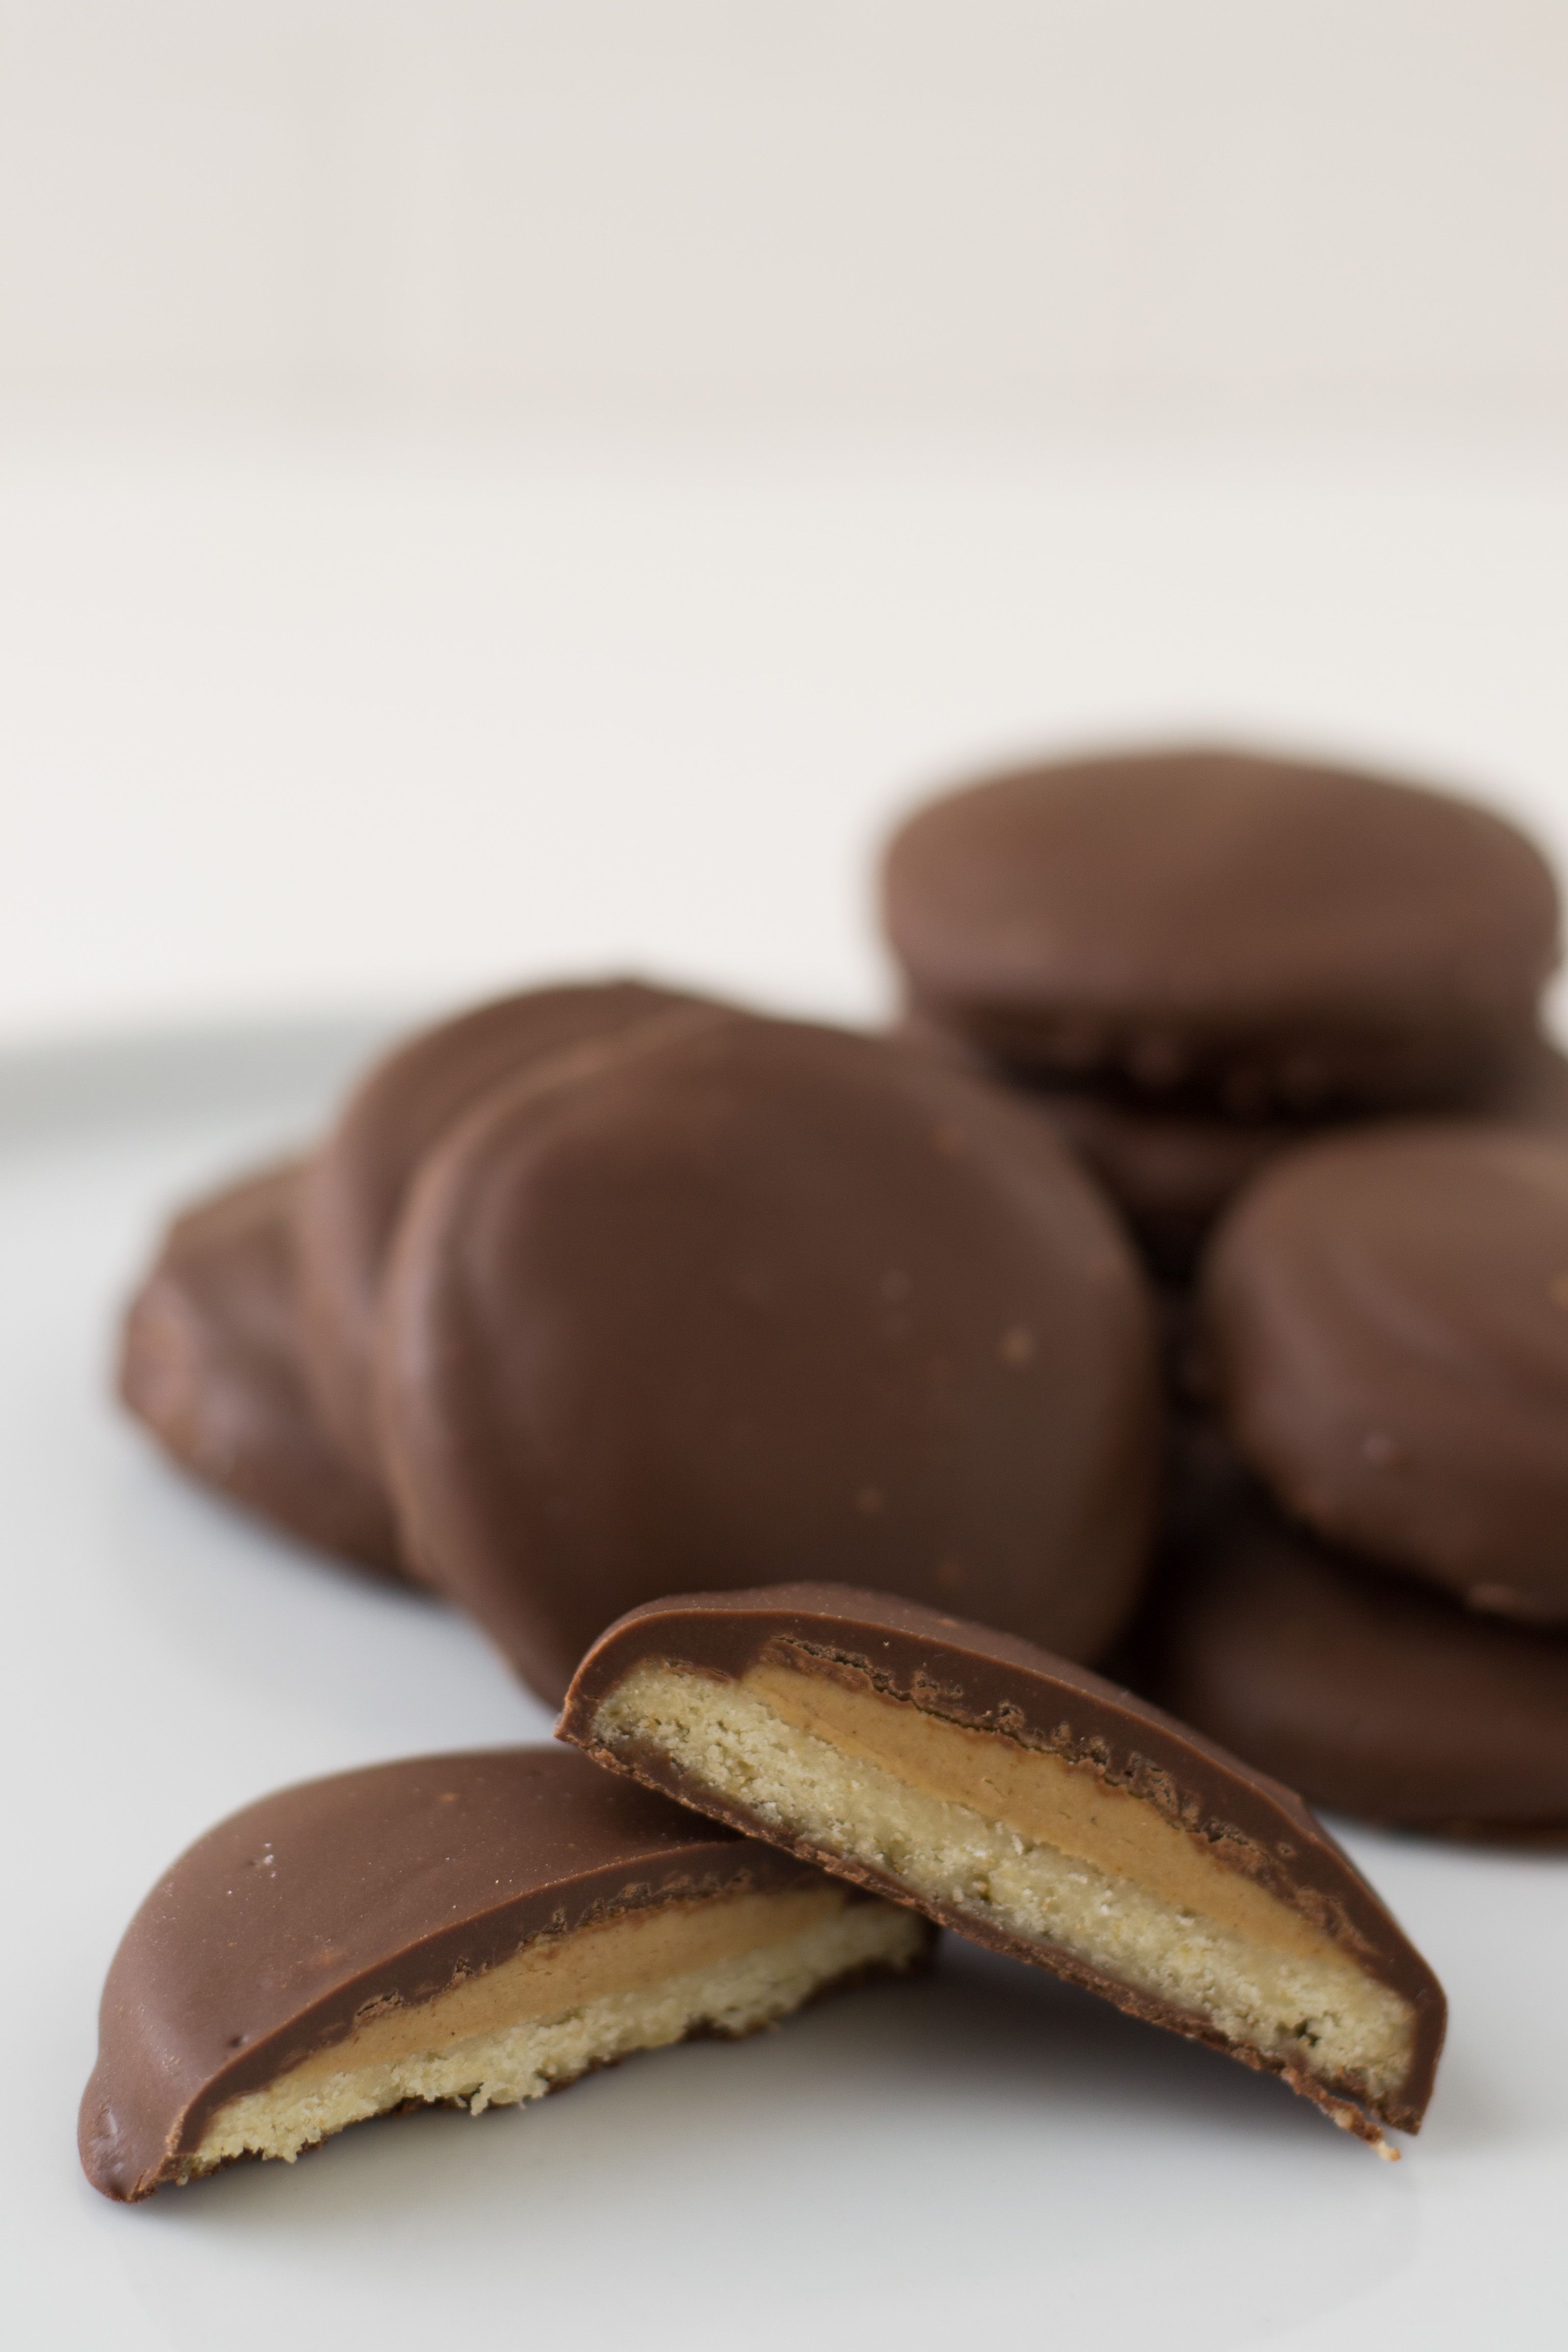 Chocolate Coated Peanut Butter Cookies (Tagalong) Recipe